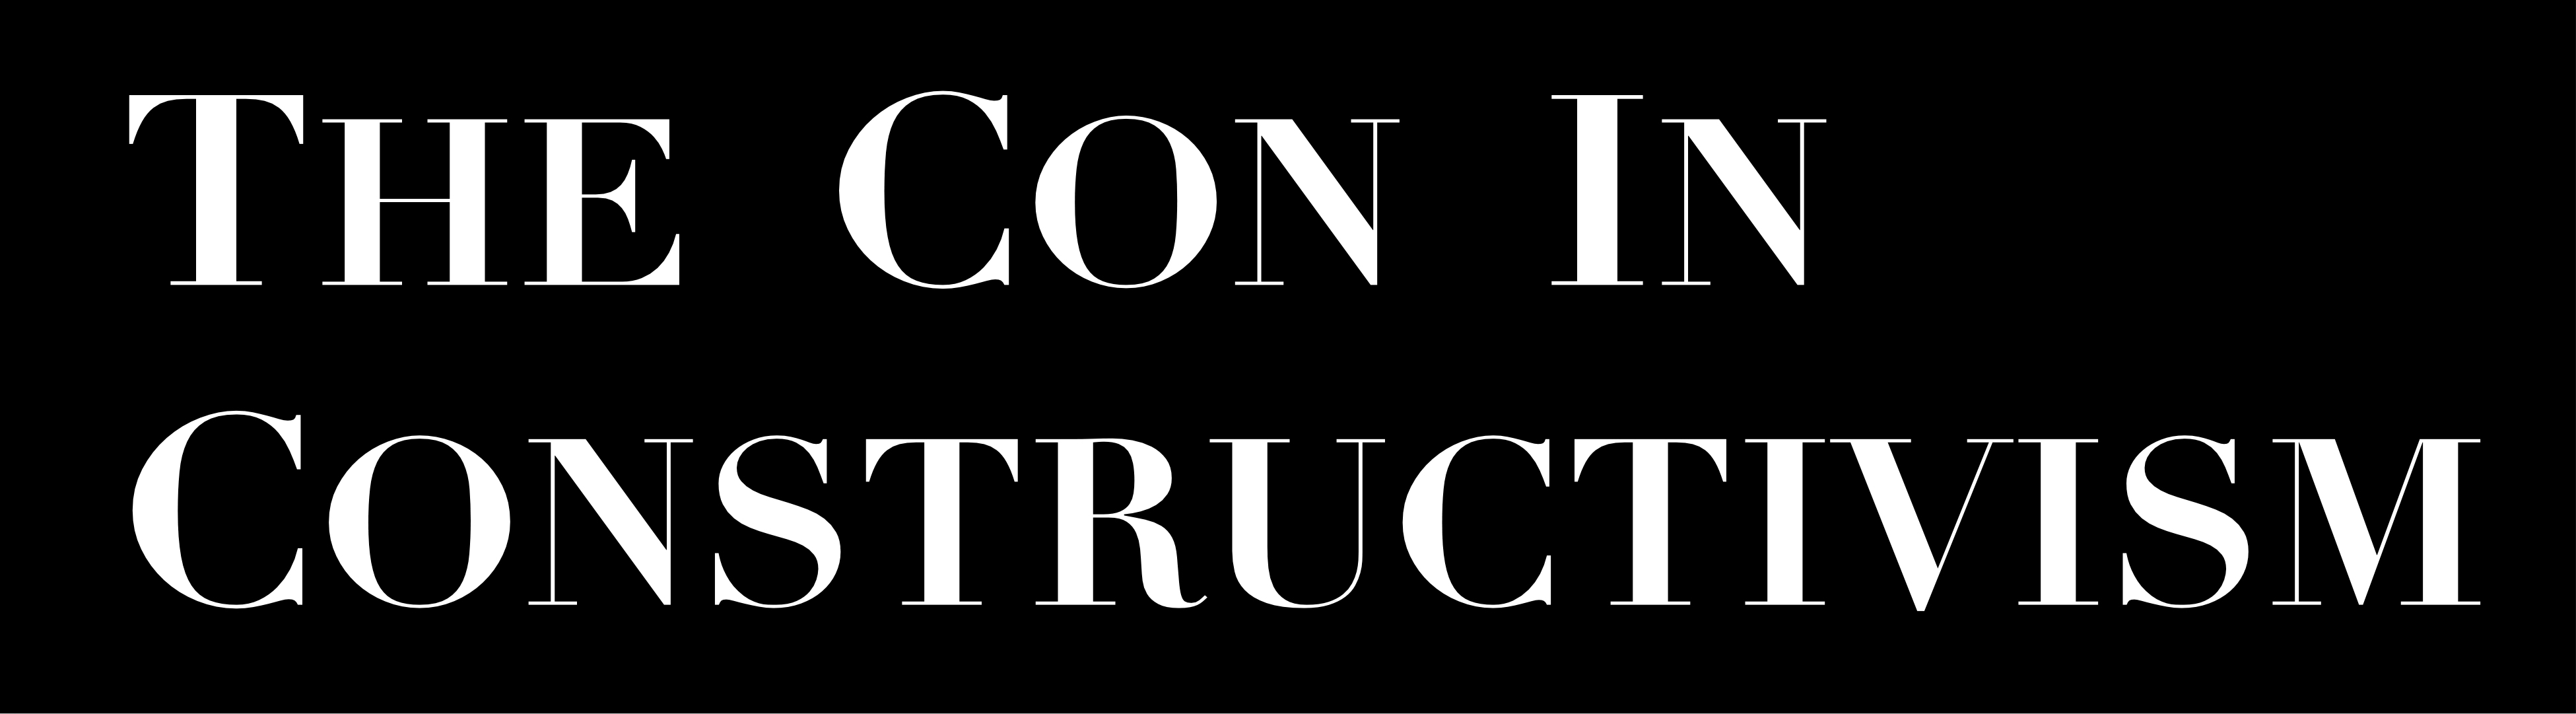 the con in constructionism